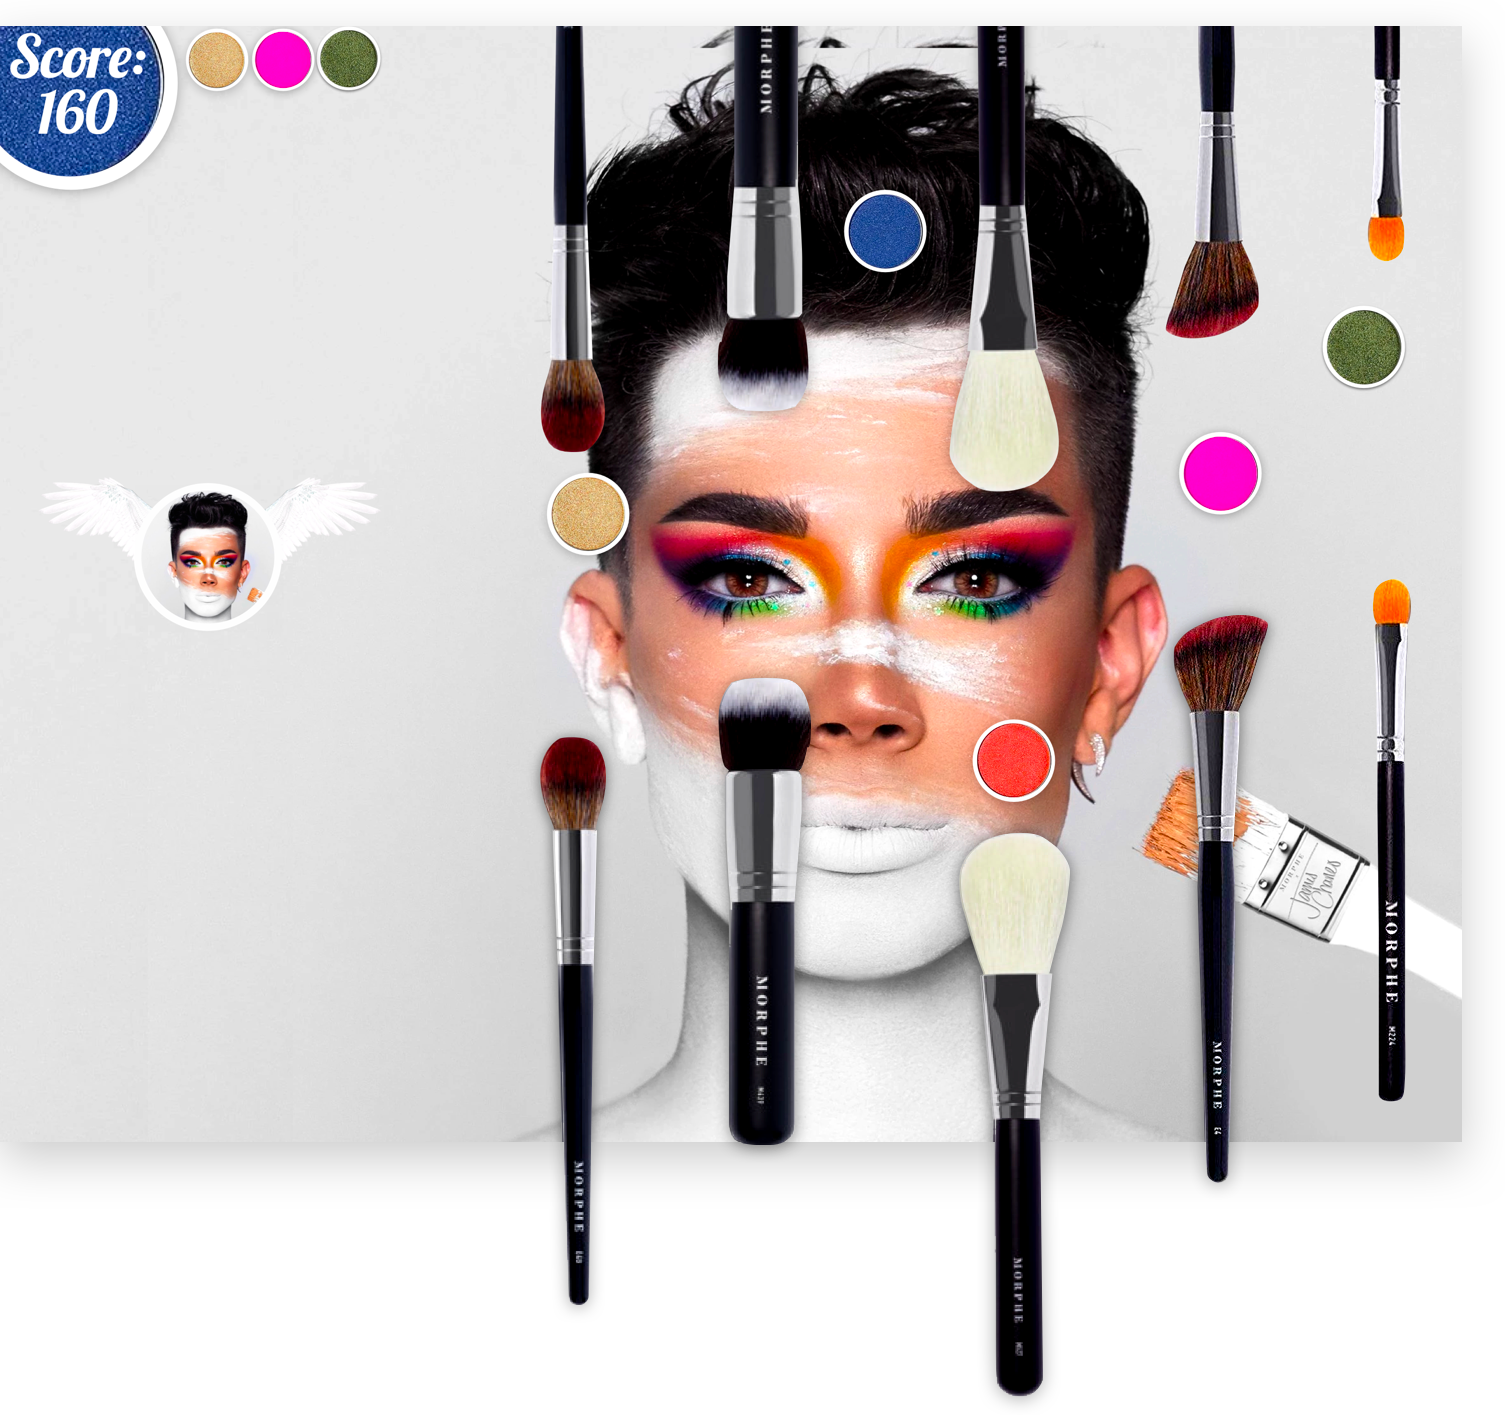 Paul Yanez James Charles Youtube Influencer Brought to life in Games